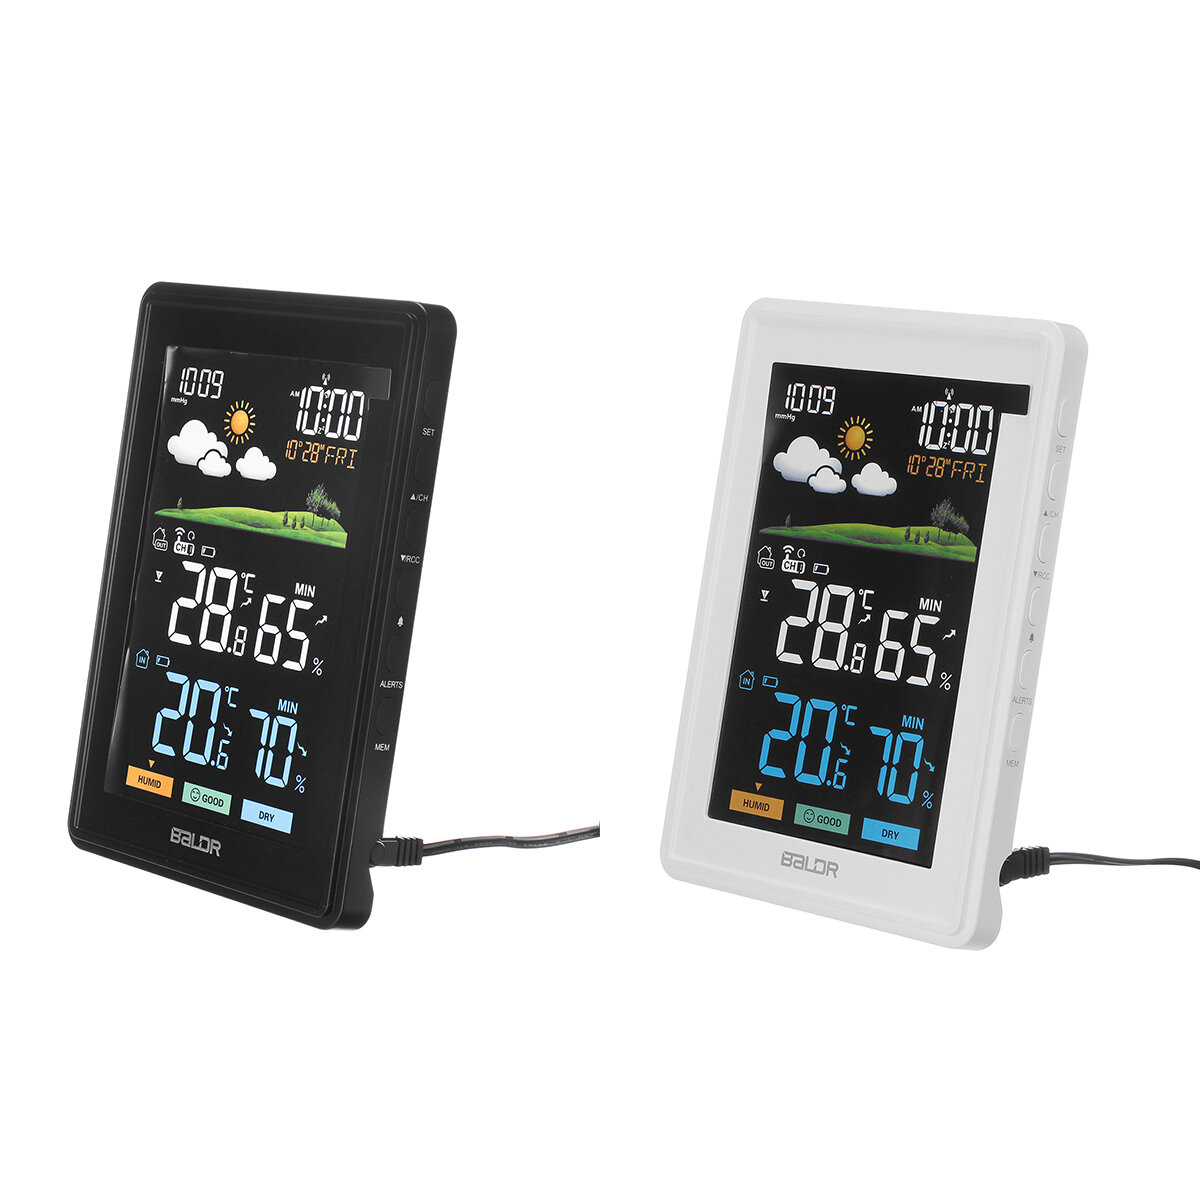 Image of Wireless Weather Station Thermohygrometer Weather Forecast Alarm Clock Perpetual Calendar Moon Phase